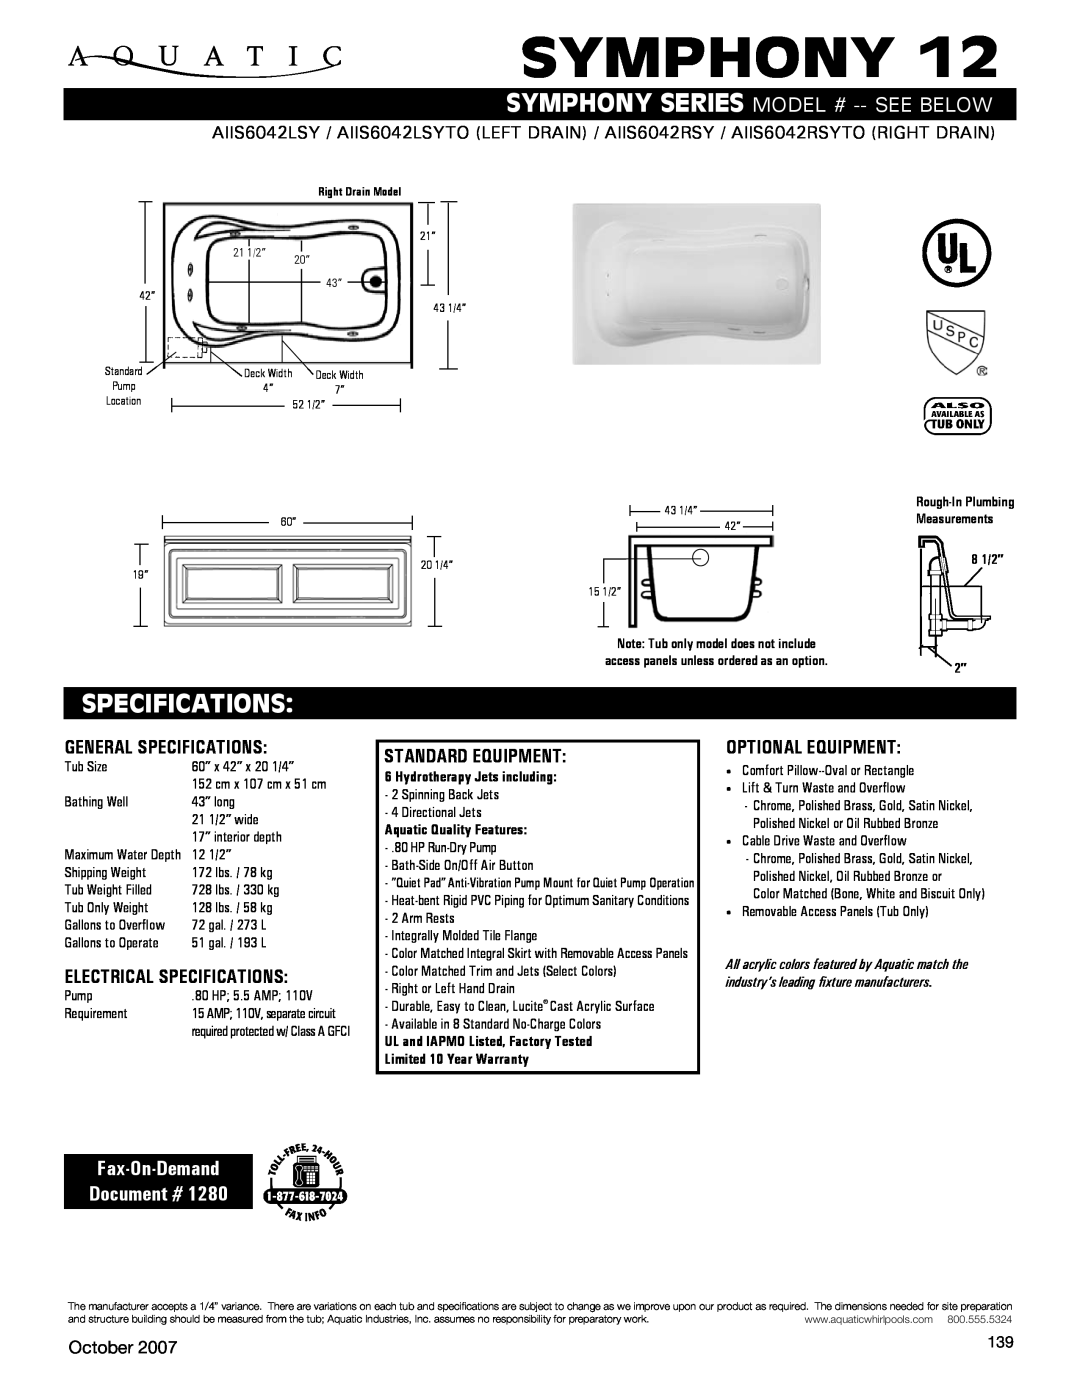 Aquatic SYPHONY SERIES specifications Specifications, symphony series Model # --See below, Fax-On-Demand Document # 